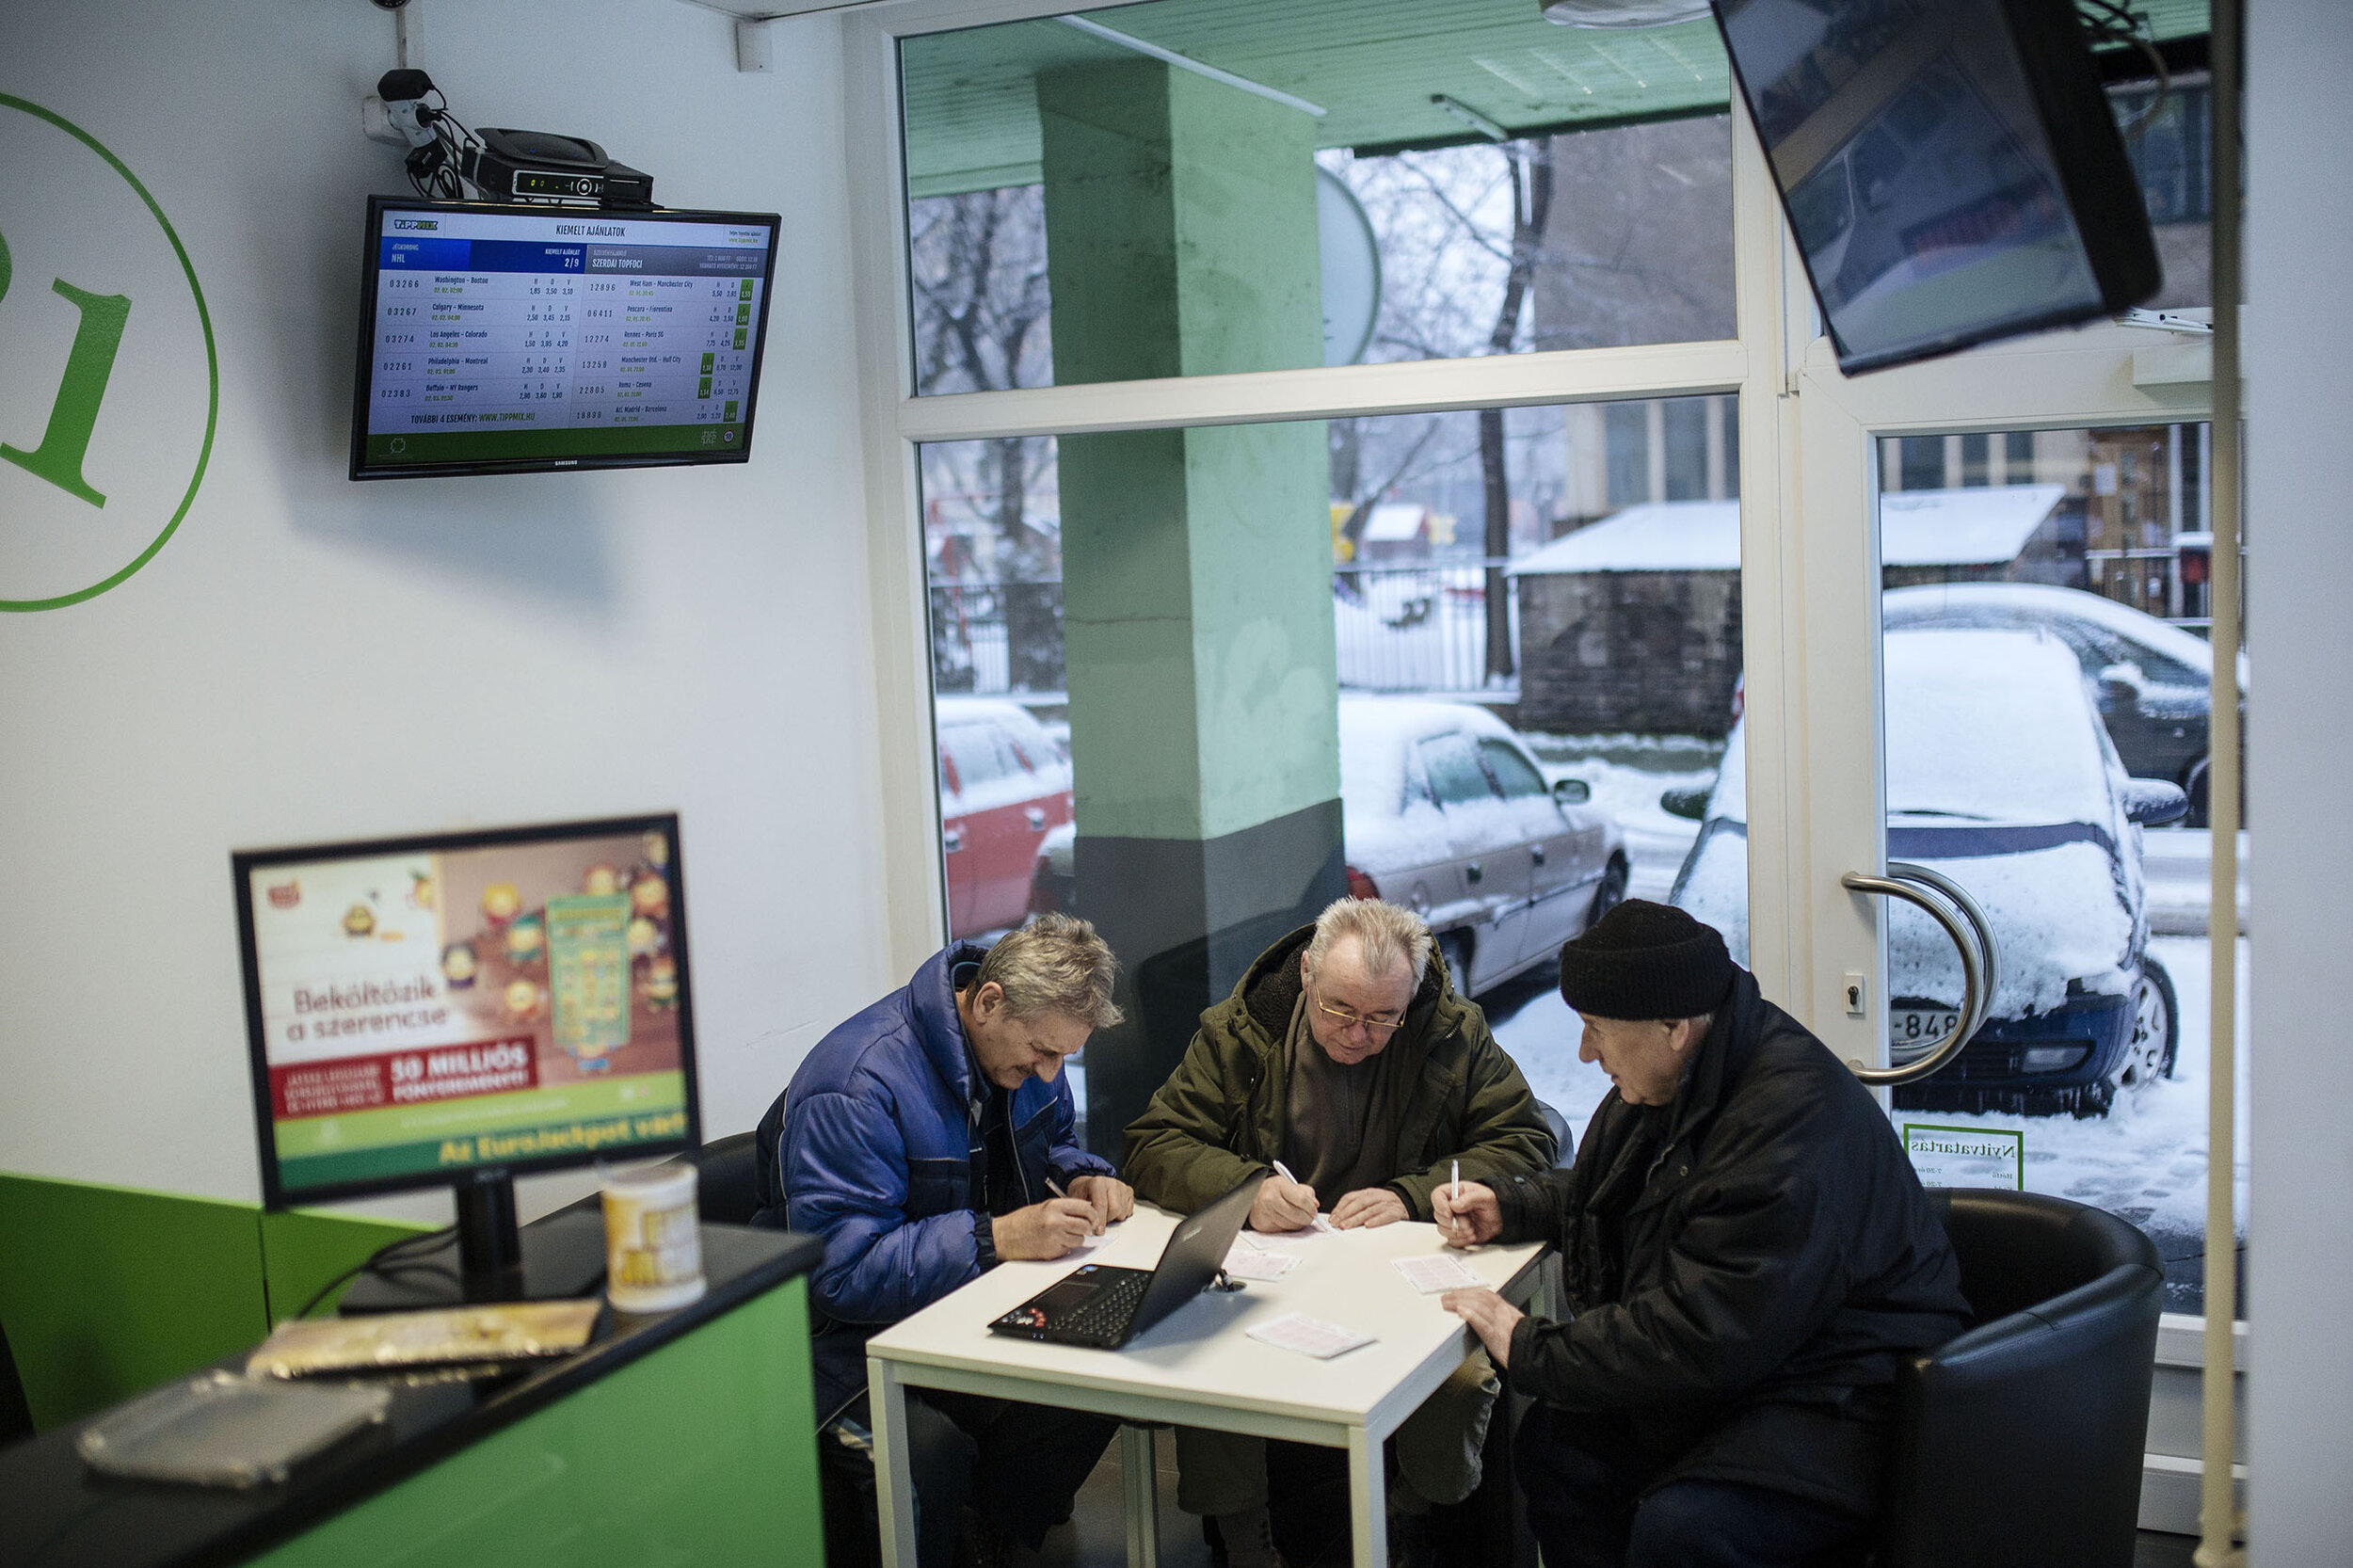  Nándi (right) and his friends are at the lottery ticket shop at half past seven. Every morning they manage to find a quarter of an hour to discuss political issues besides the events of the previous day and pulling each other’s leg. Only after this 